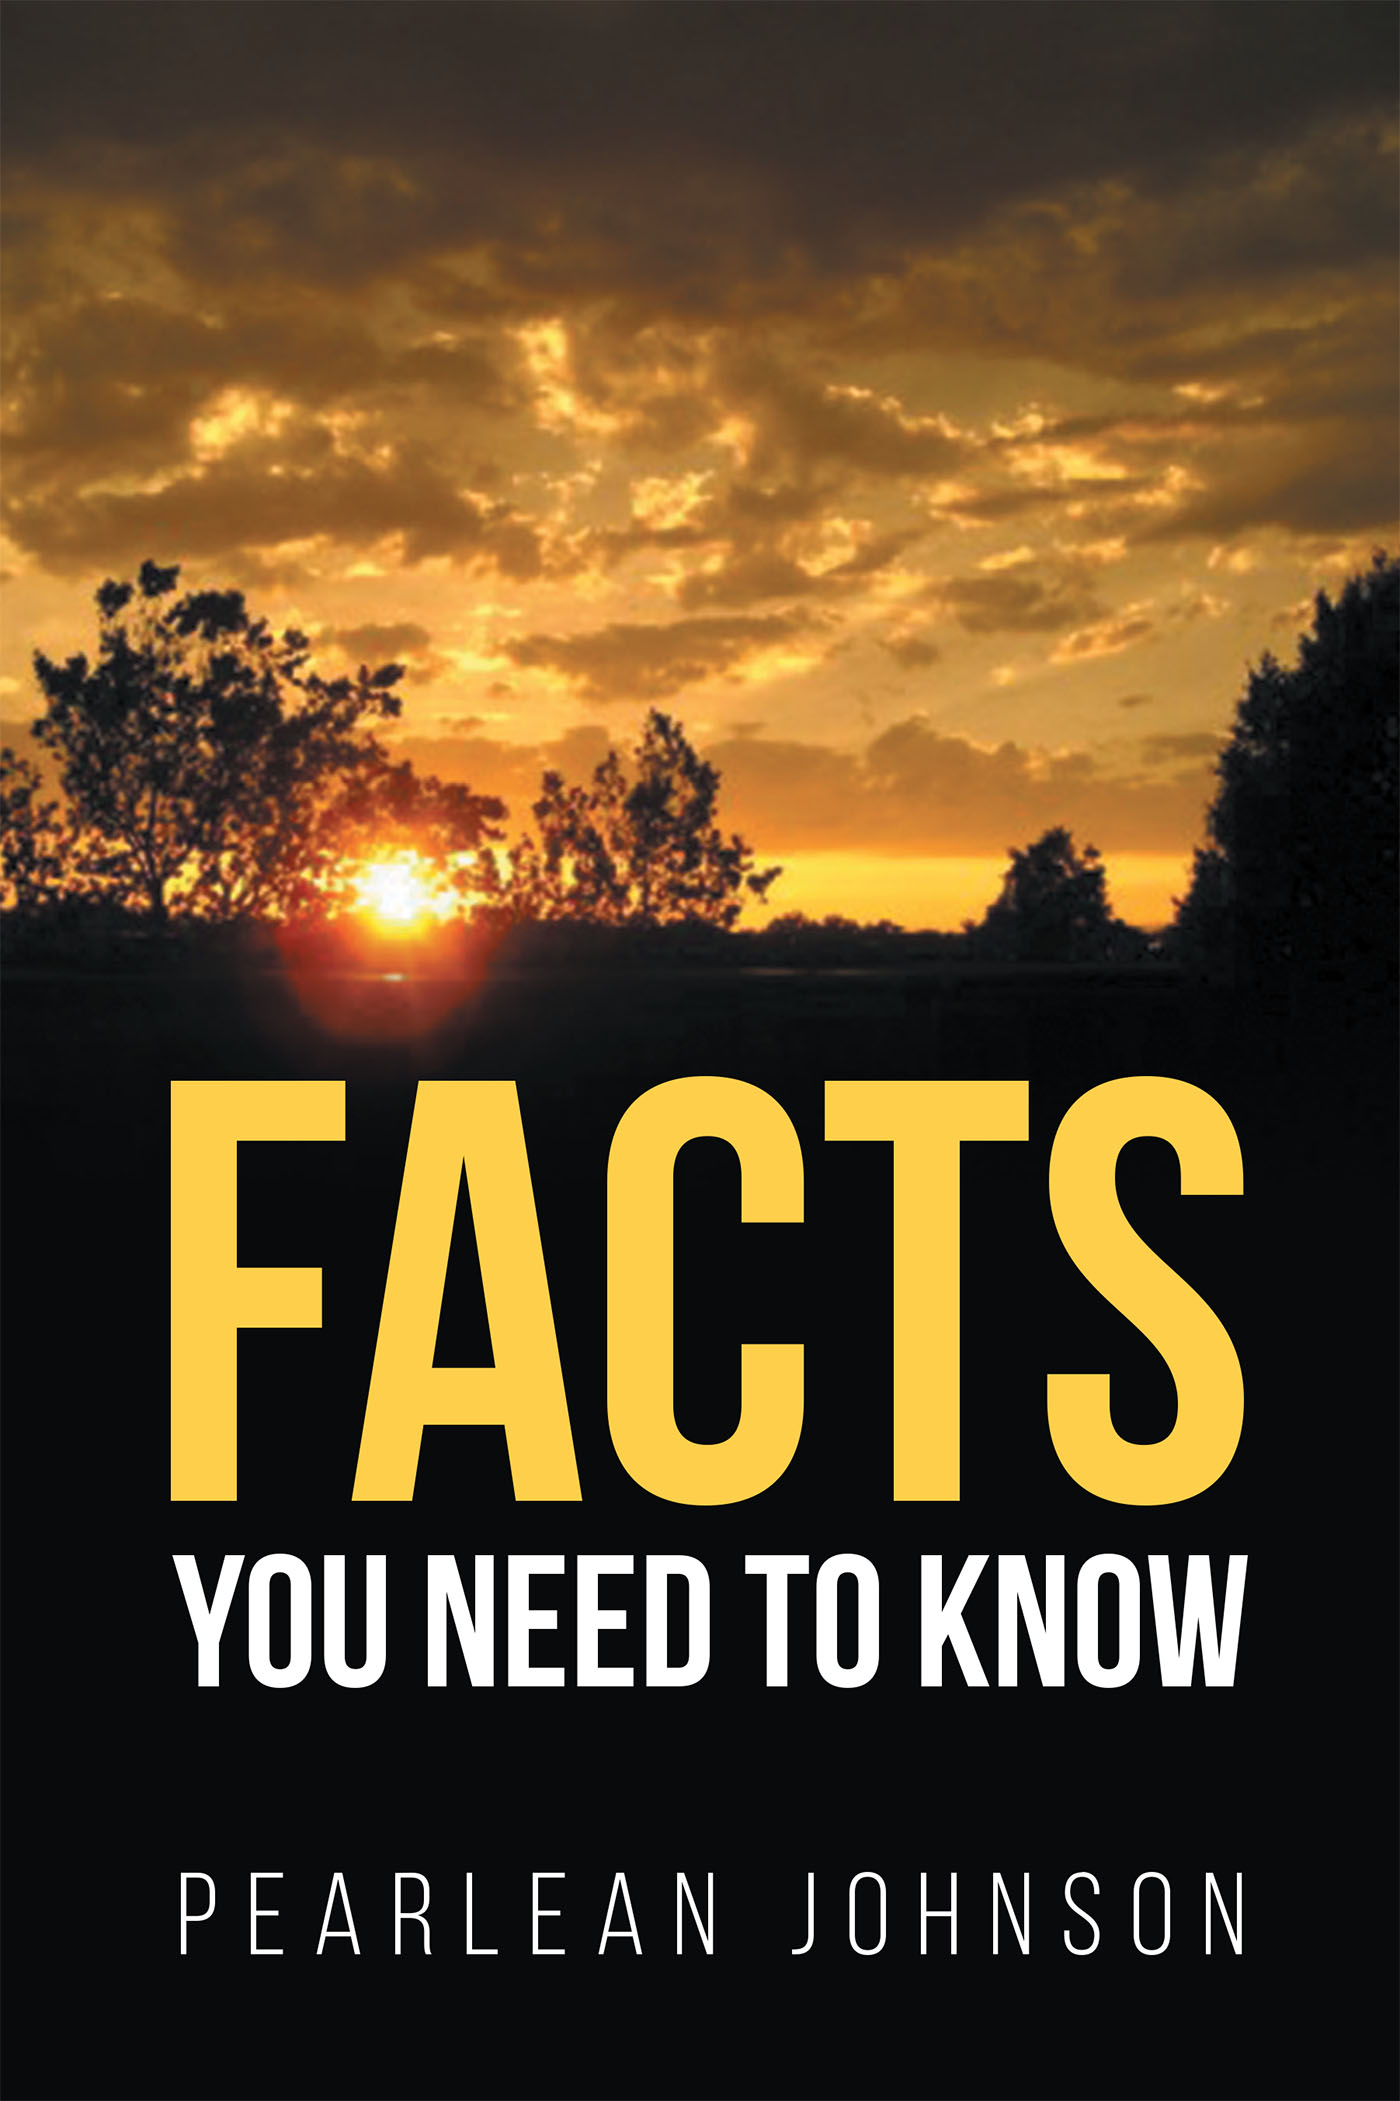 Facts You Need to Know Cover Image